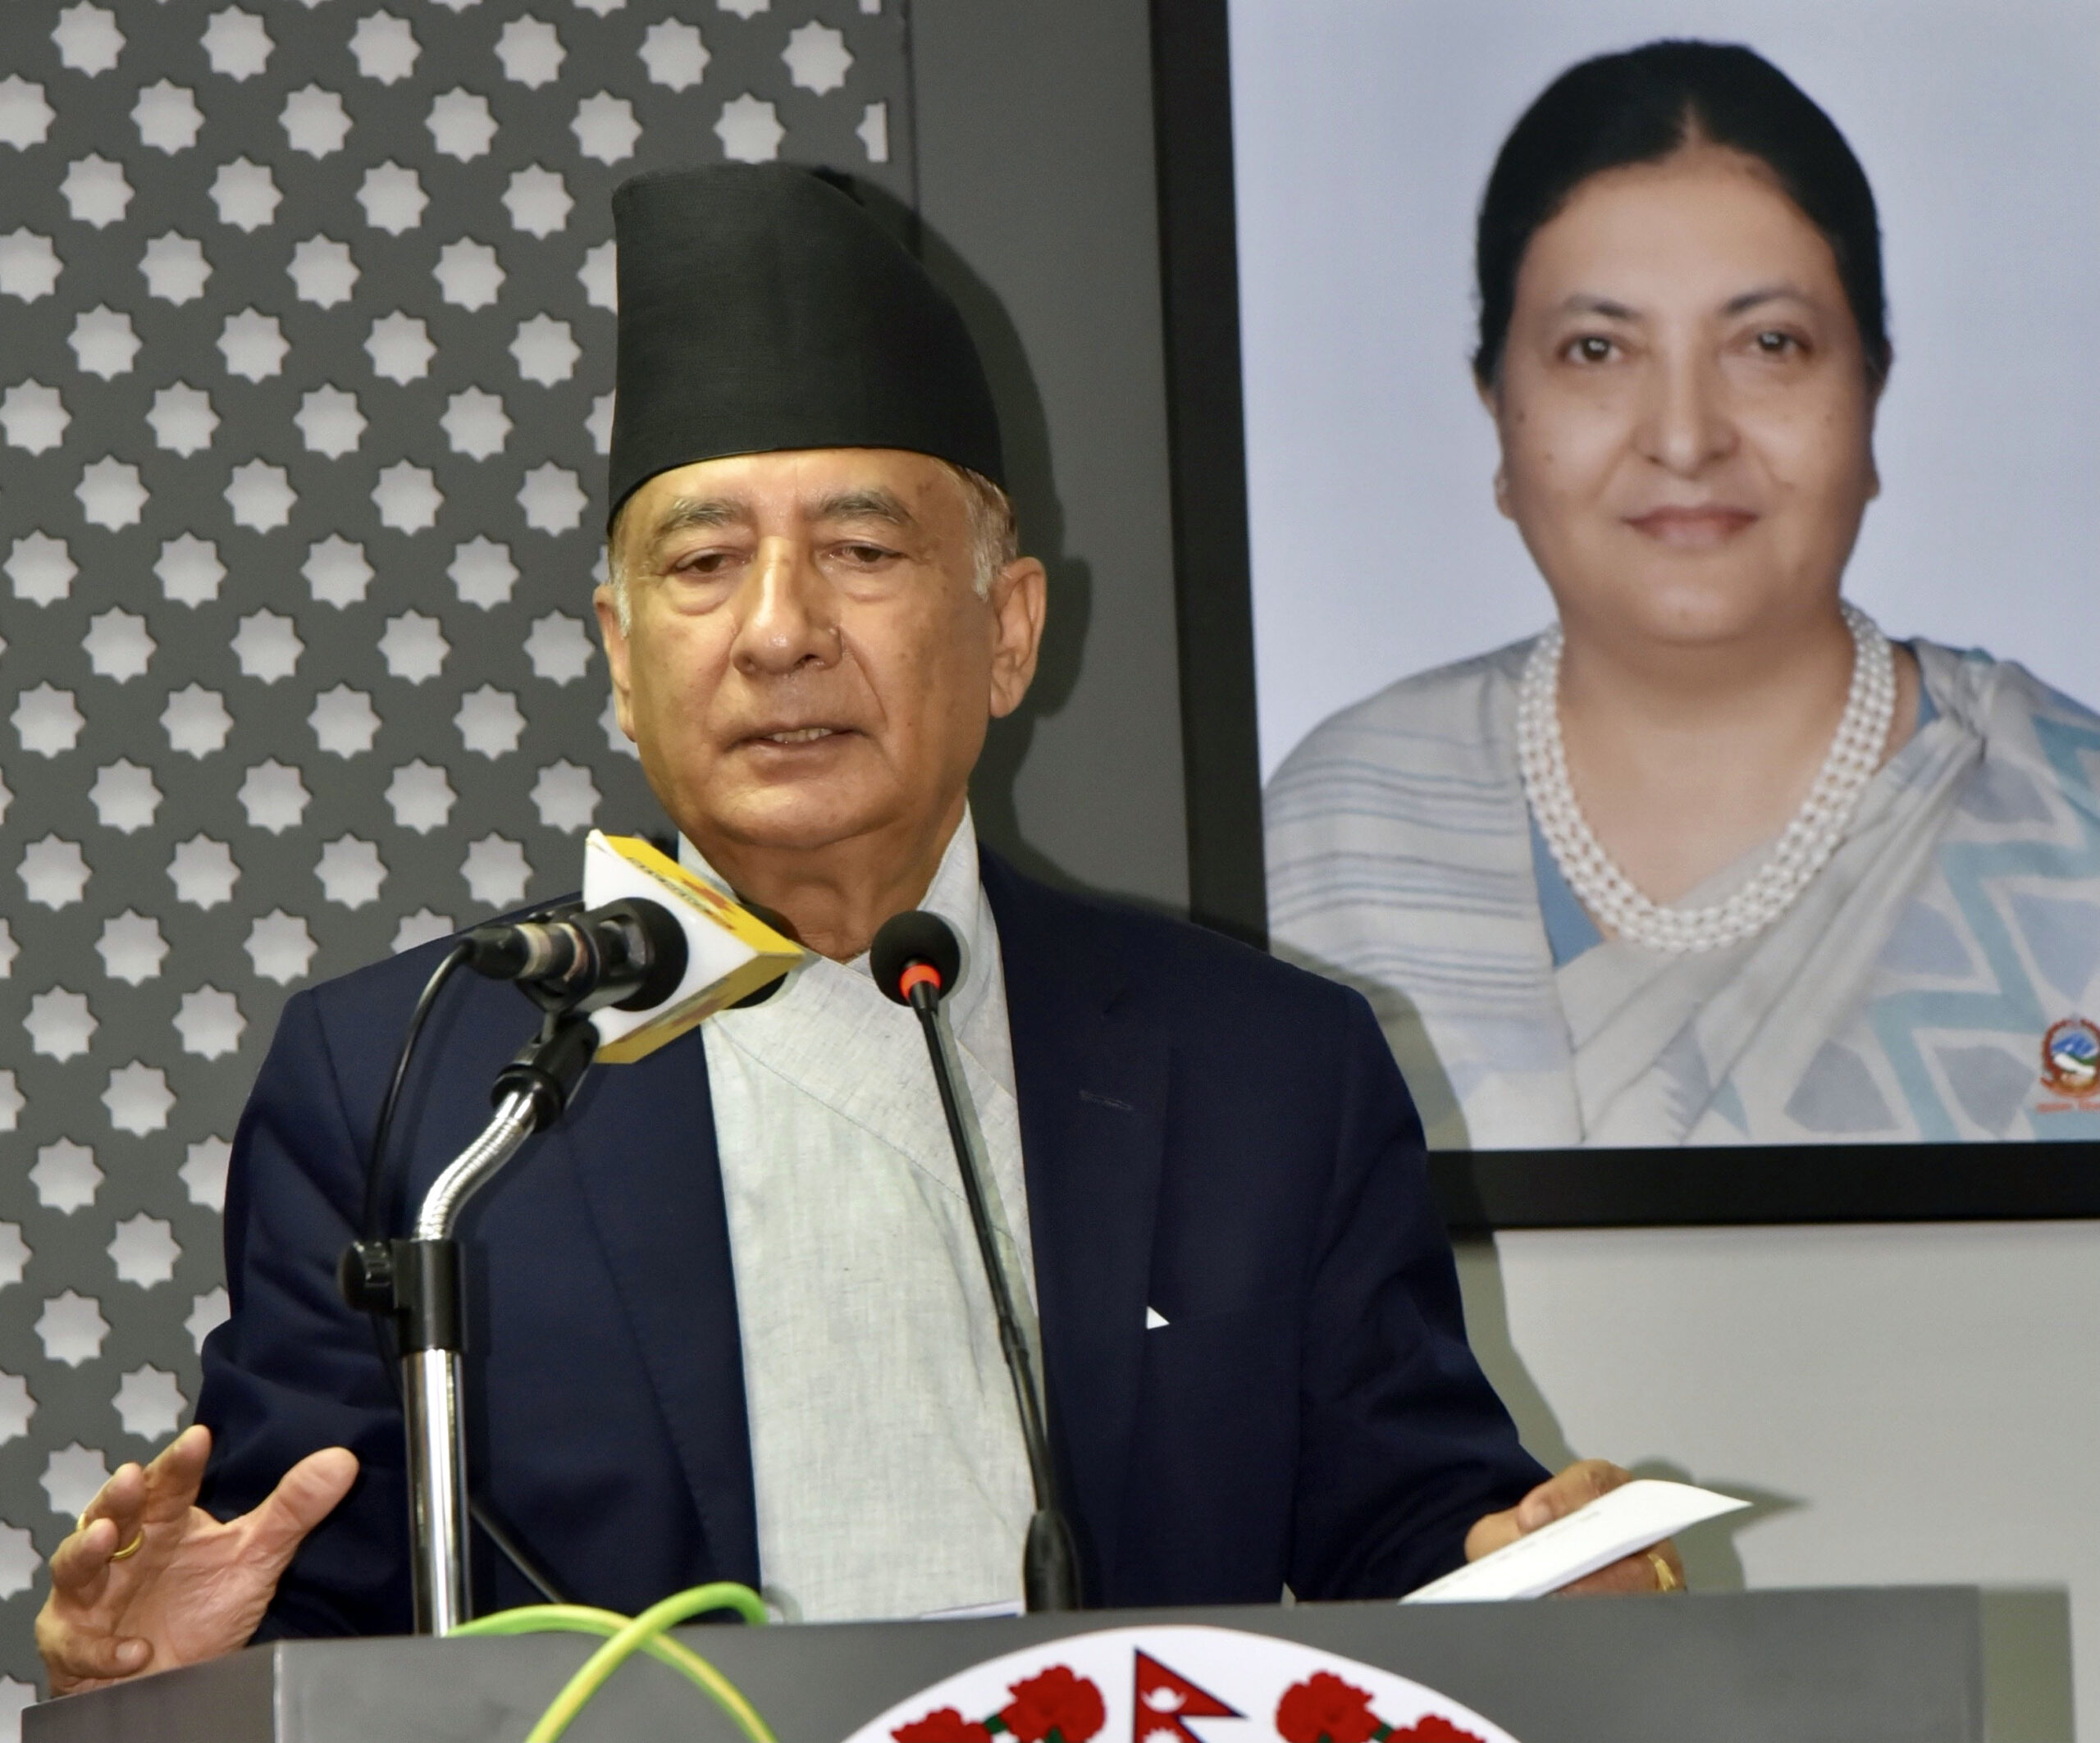 Nepal to accept 275 million US dollar loan assistance provided by World Bank